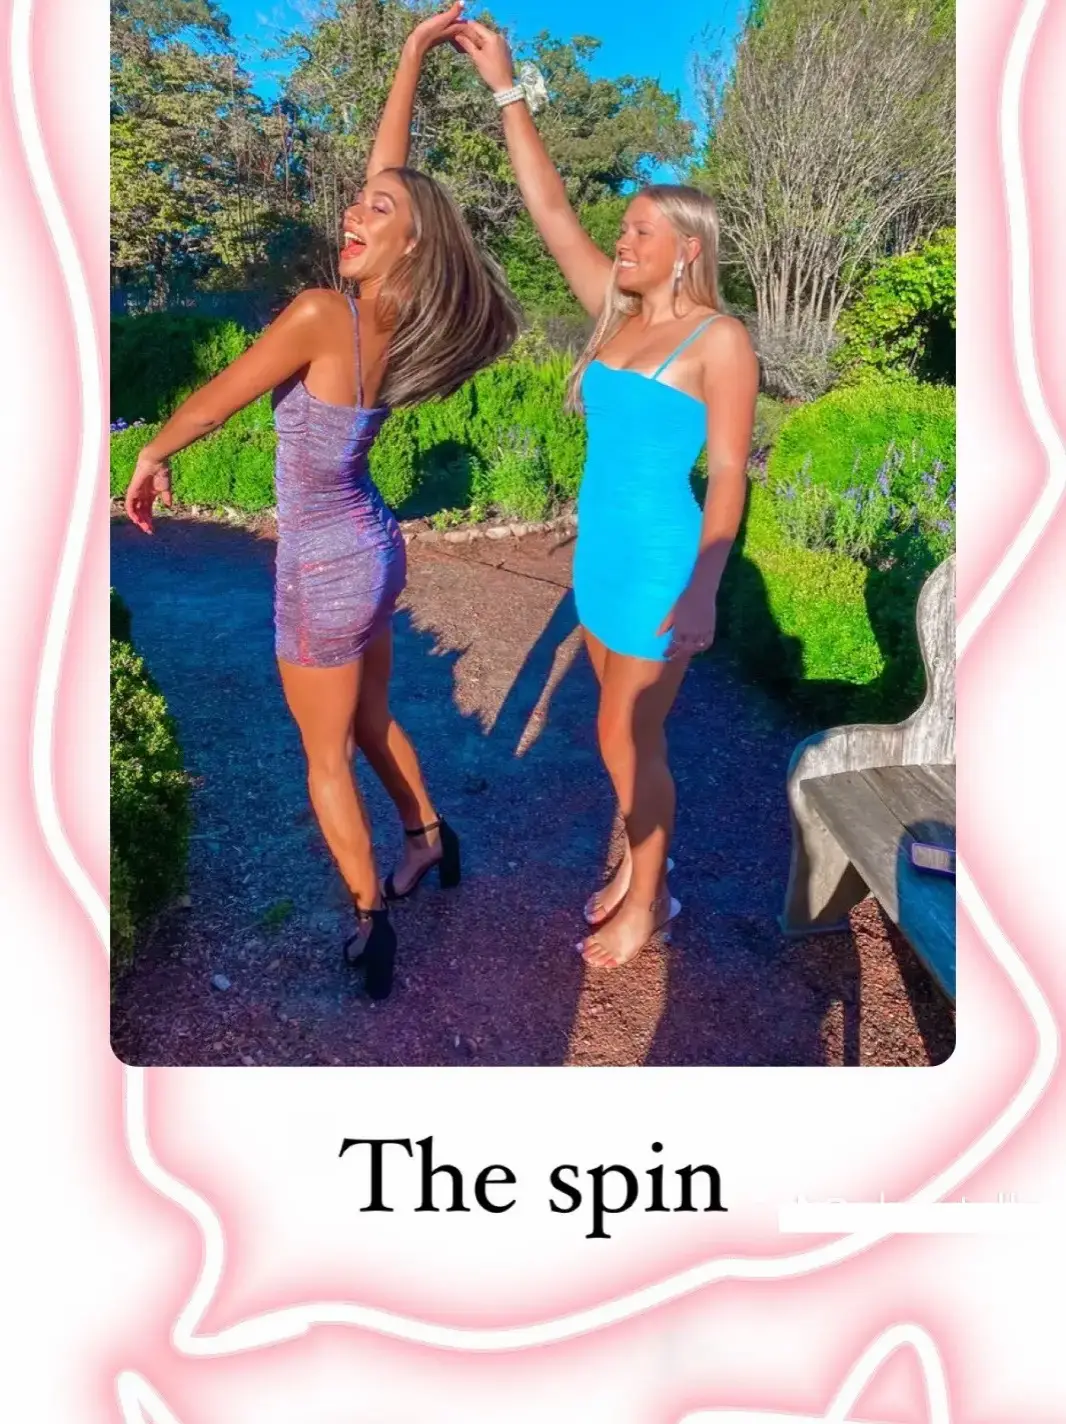  Two women are standing in a field, one wearing a xanh rớt dress and the other wearing a red dress. They are both wearing sandals and are smiling. The image is titled "The spin."